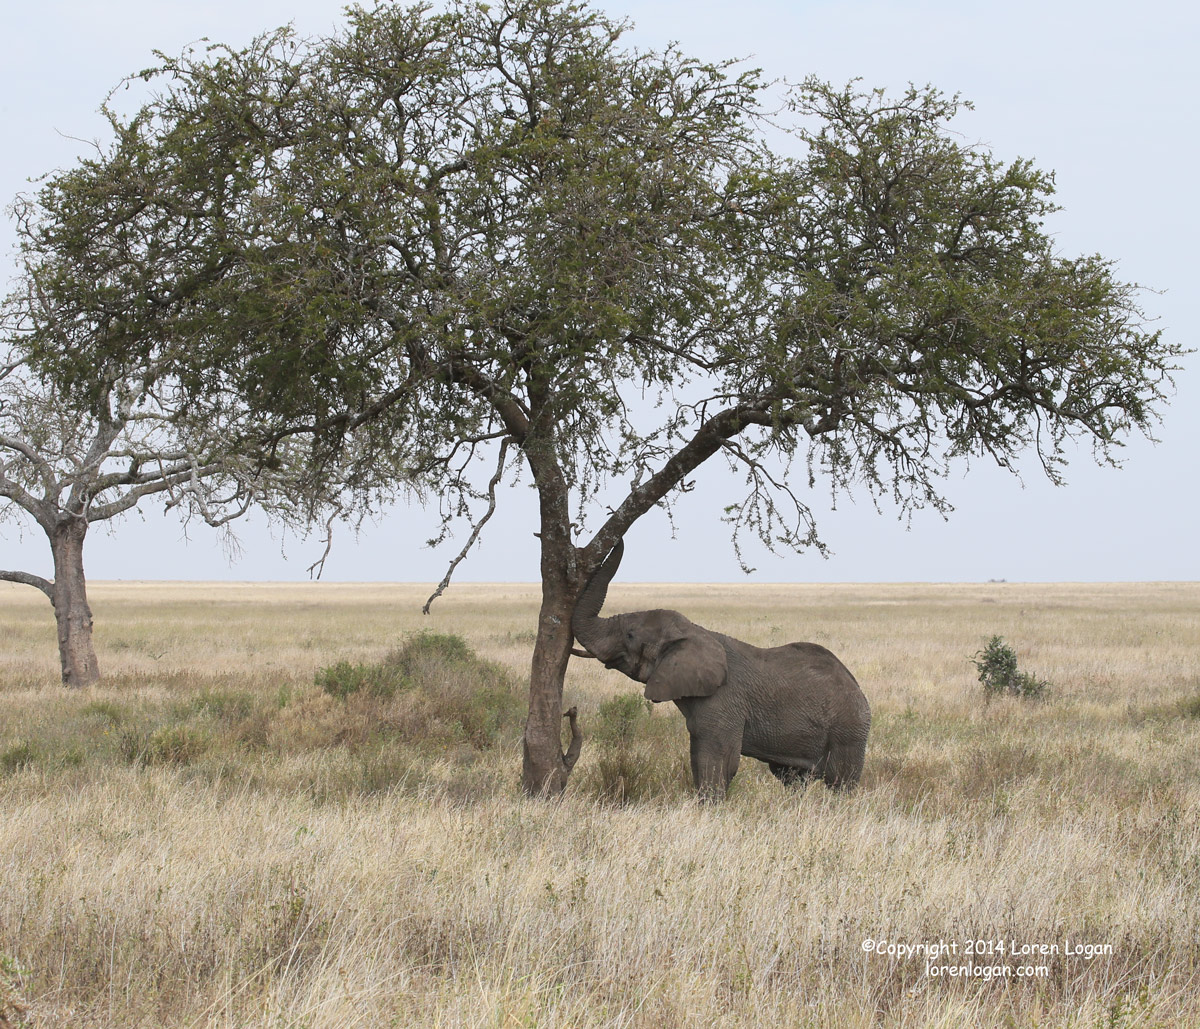 This one-tusked elephant pushes against a tree, shaking it and shaking it. Perhaps in hope of a stray branch falling or even...